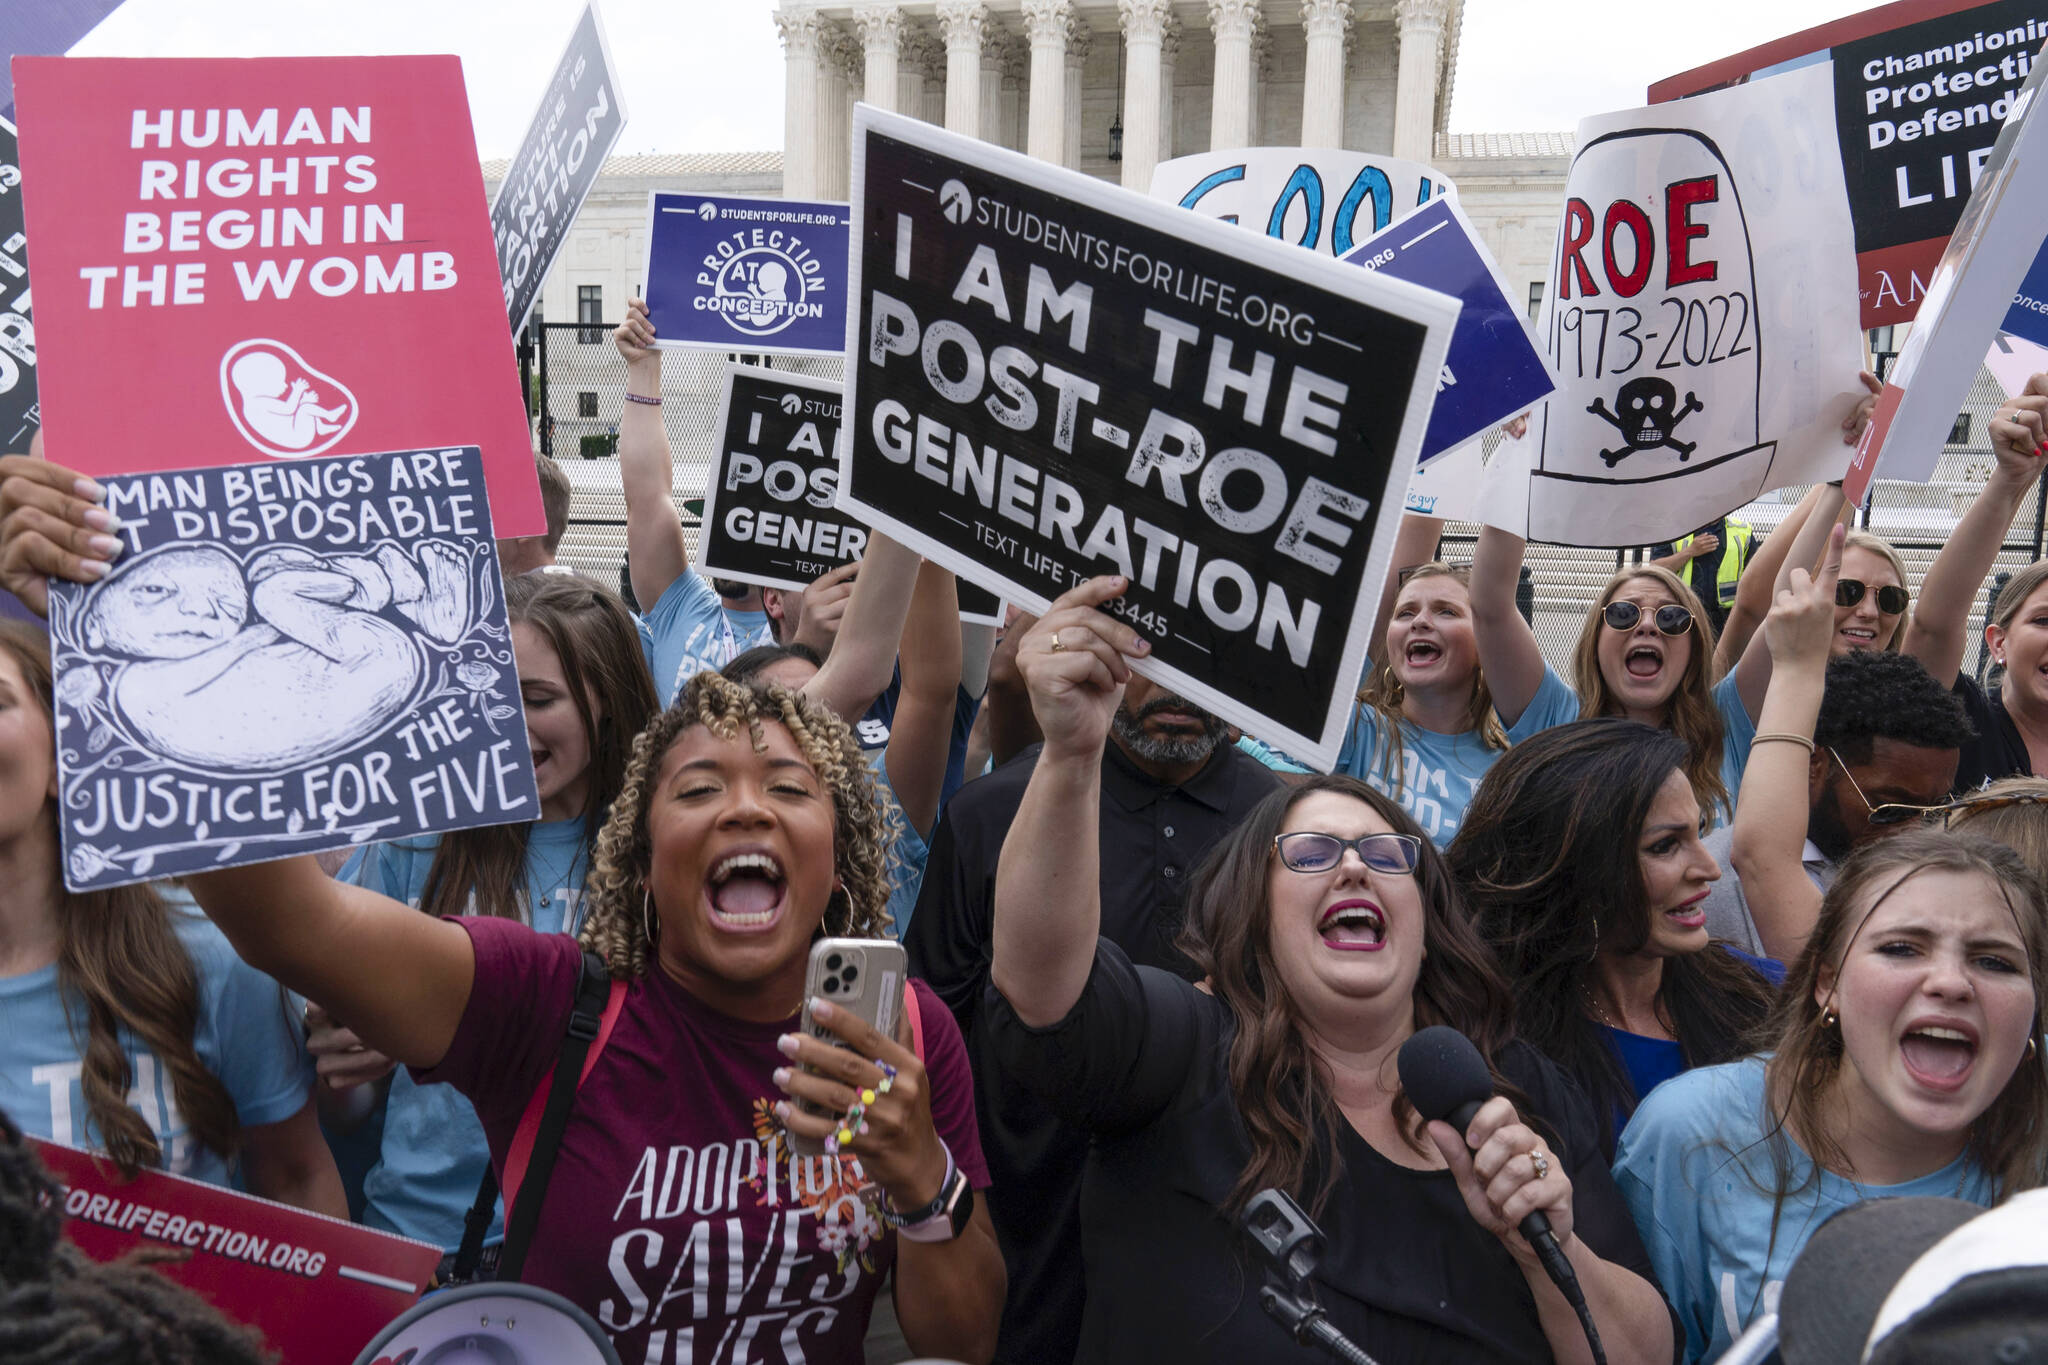 Demonstrators gather outside the Supreme Court in Washington, Friday, June 24, 2022. The Supreme Court has ended constitutional protections for abortion that had been in place nearly 50 years, a decision by its conservative majority to overturn the court’s landmark abortion cases. (AP Photo / Jose Luis Magana)